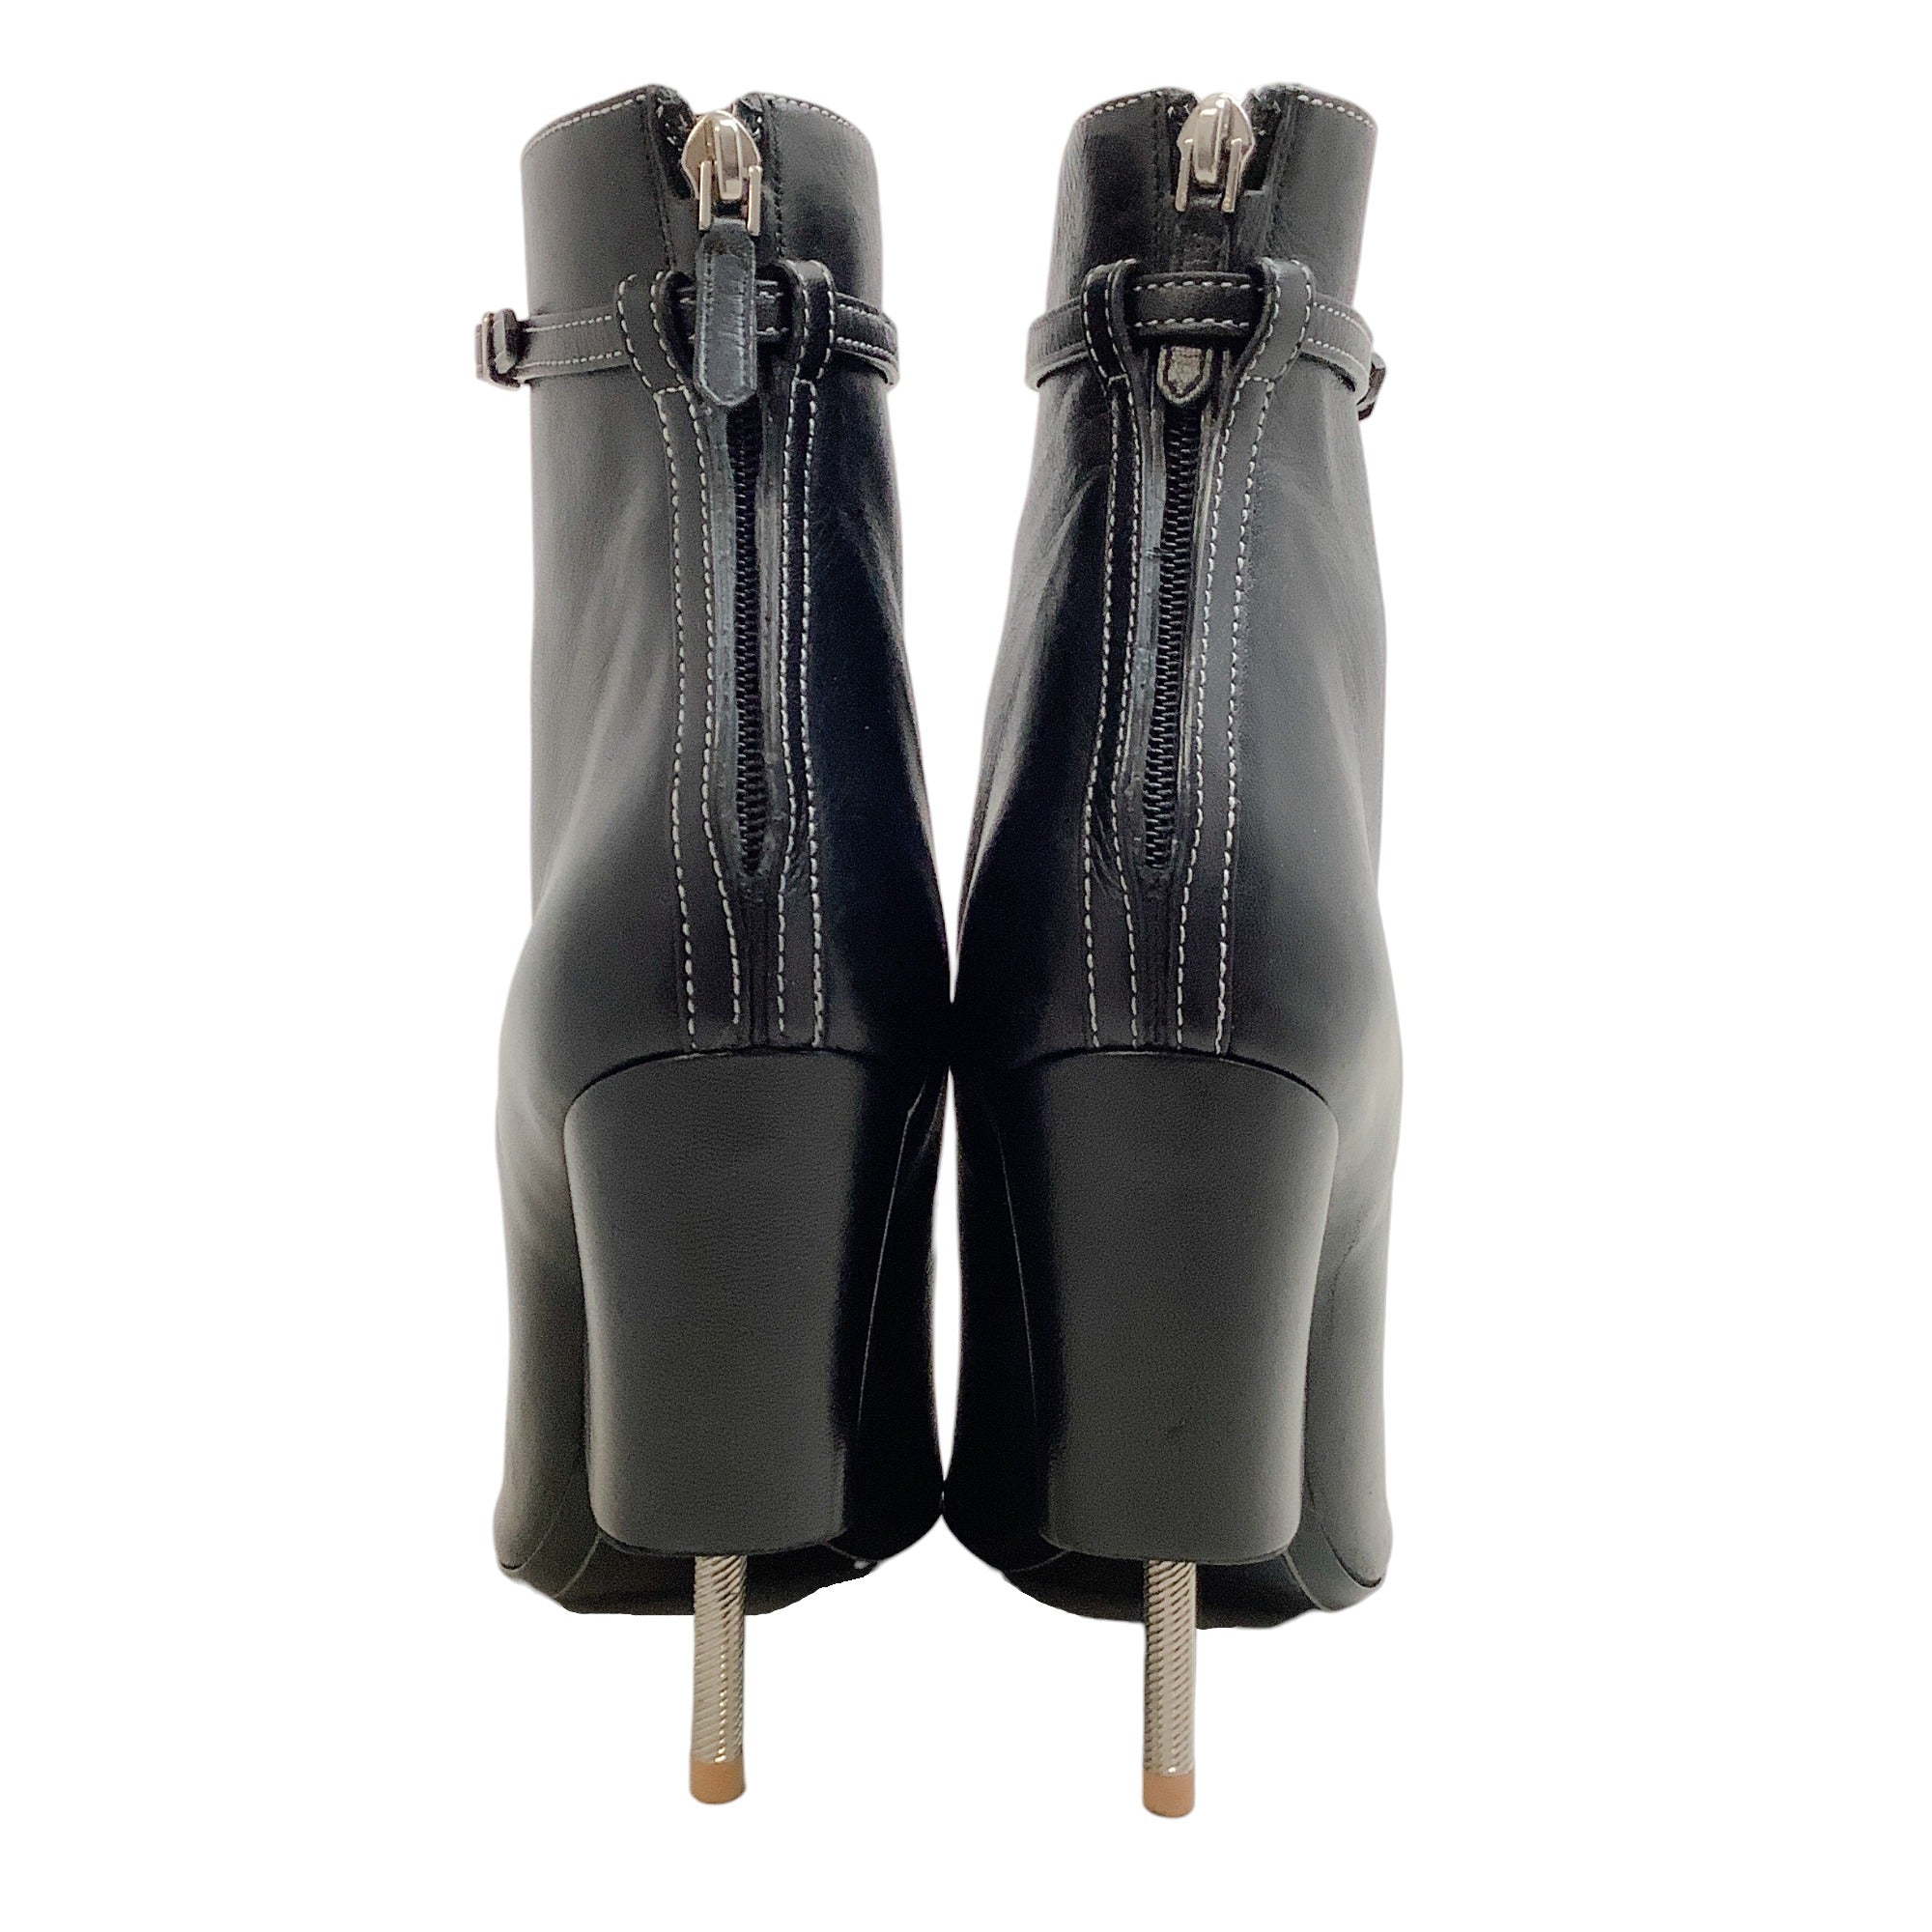 Givenchy Black Leather Open Toe Screw Heel Booties